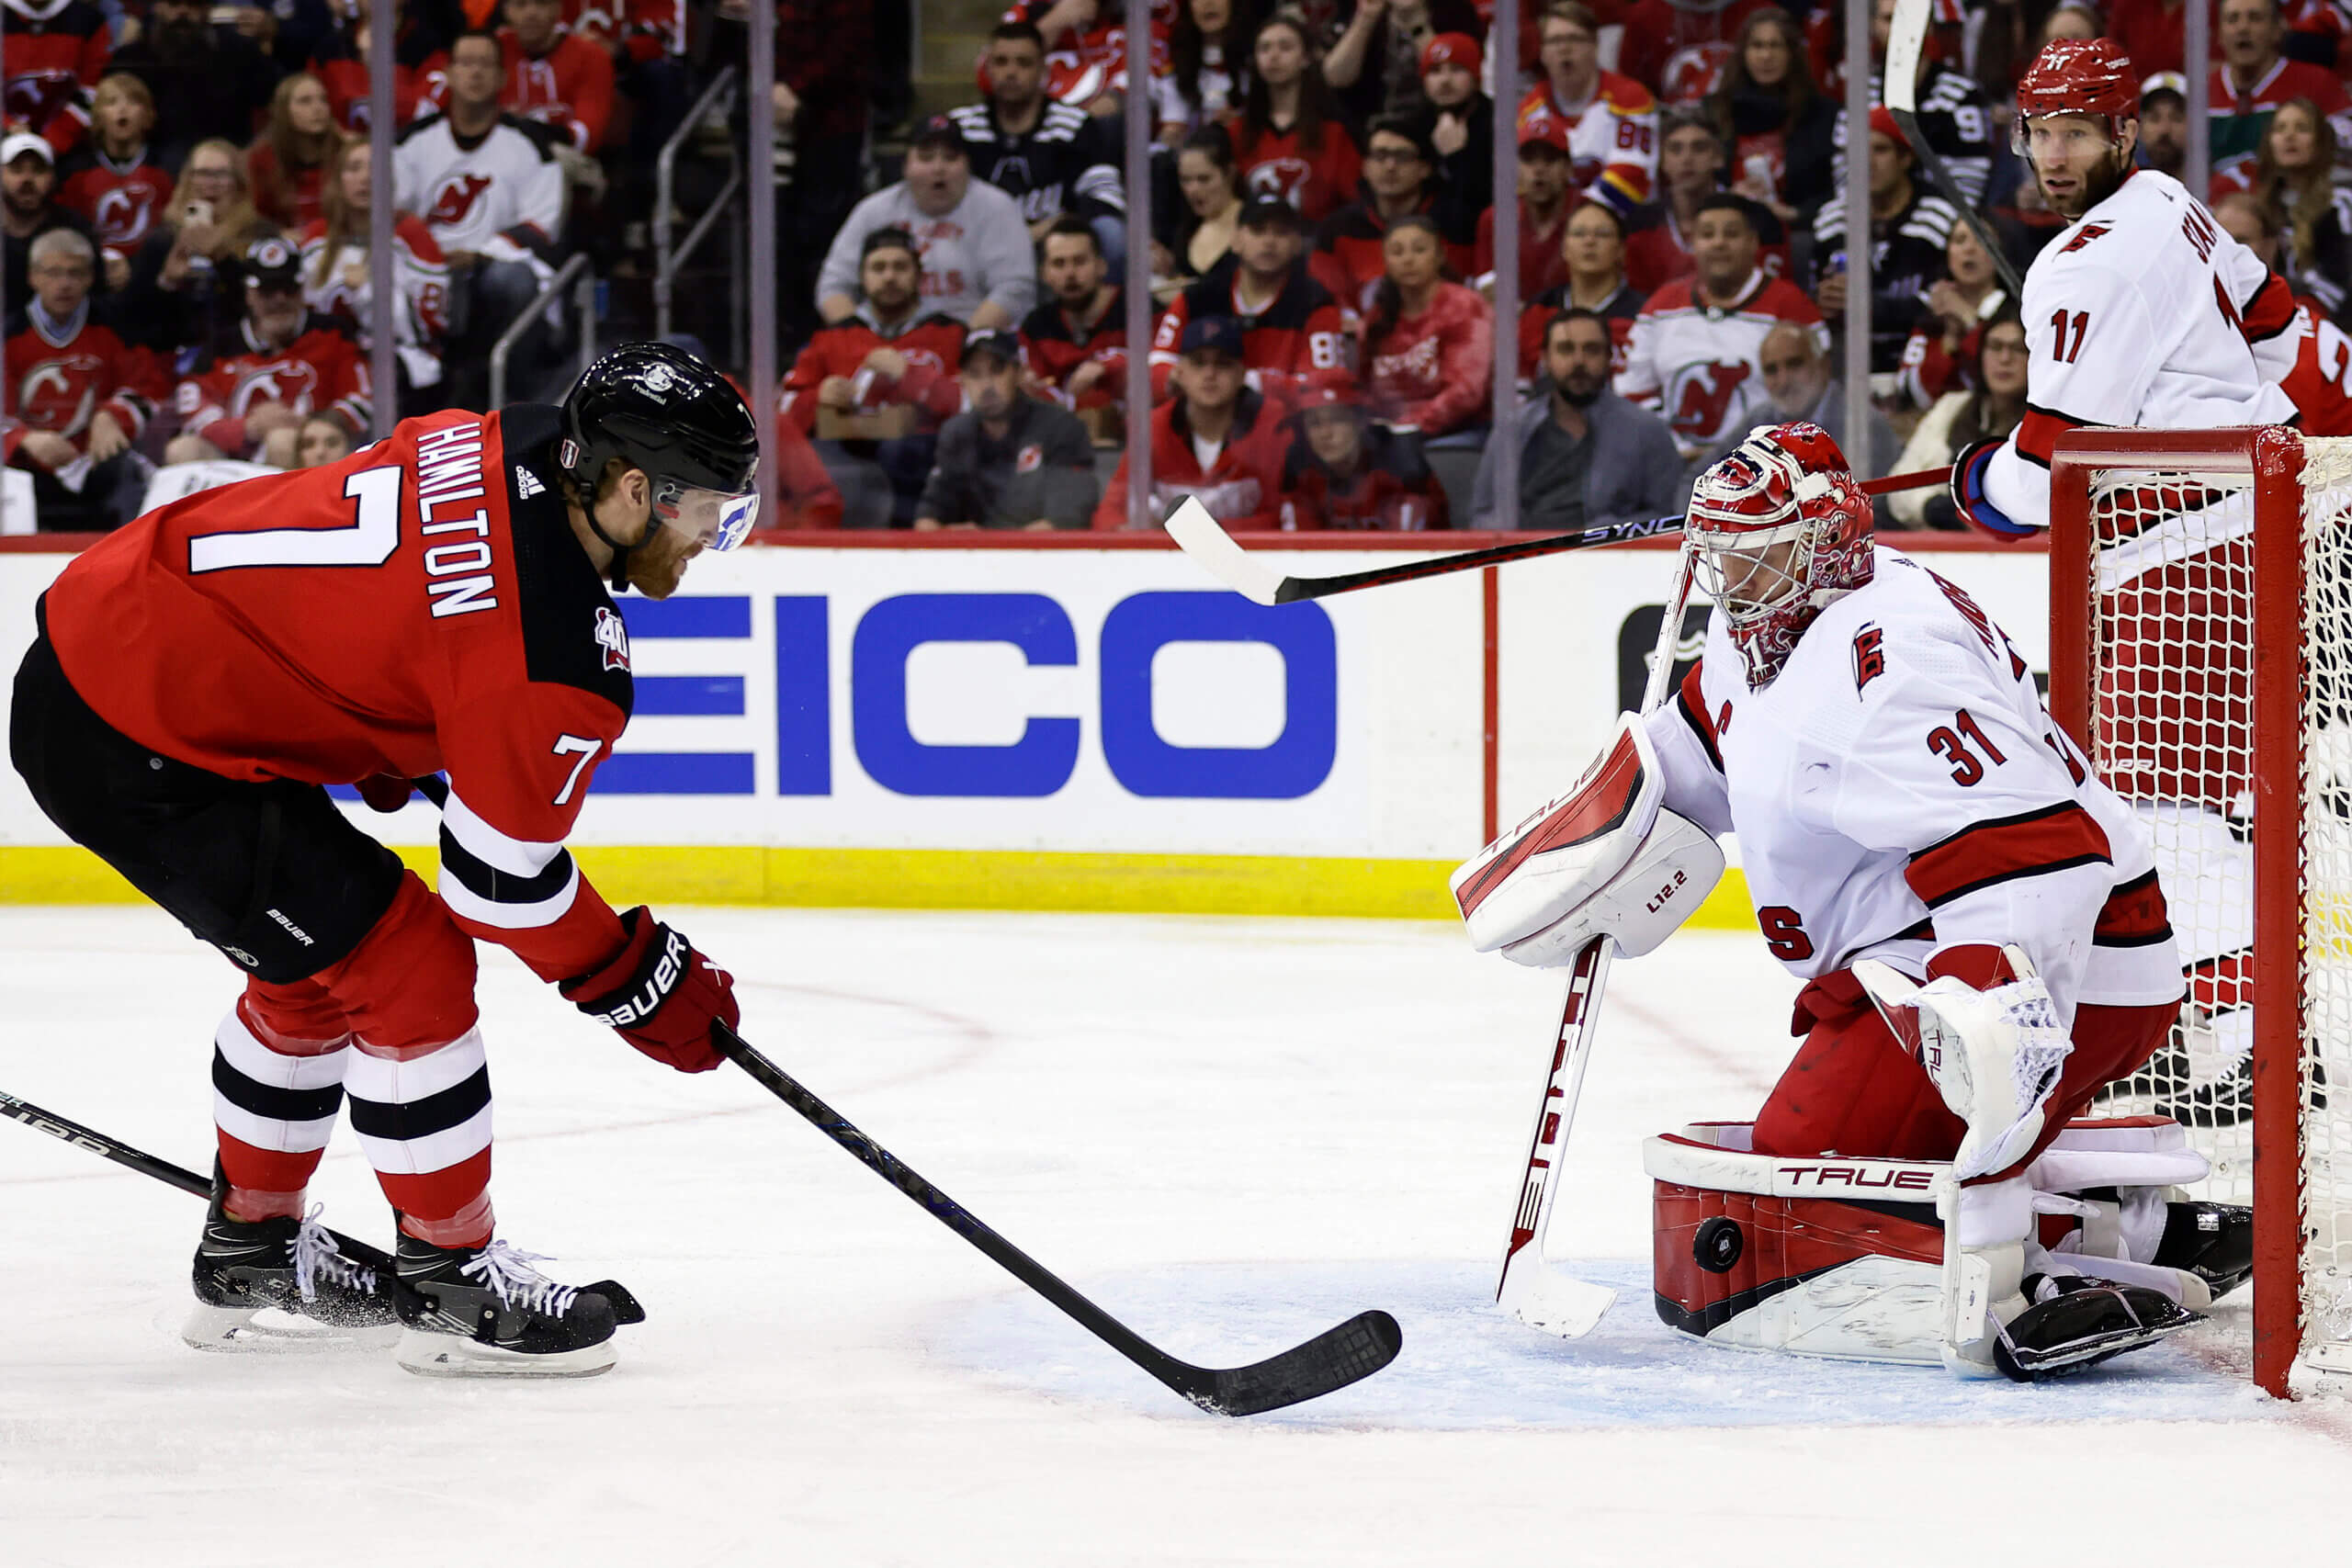 Hurricanes lose first game 7 since relocation, eliminated by the Rangers